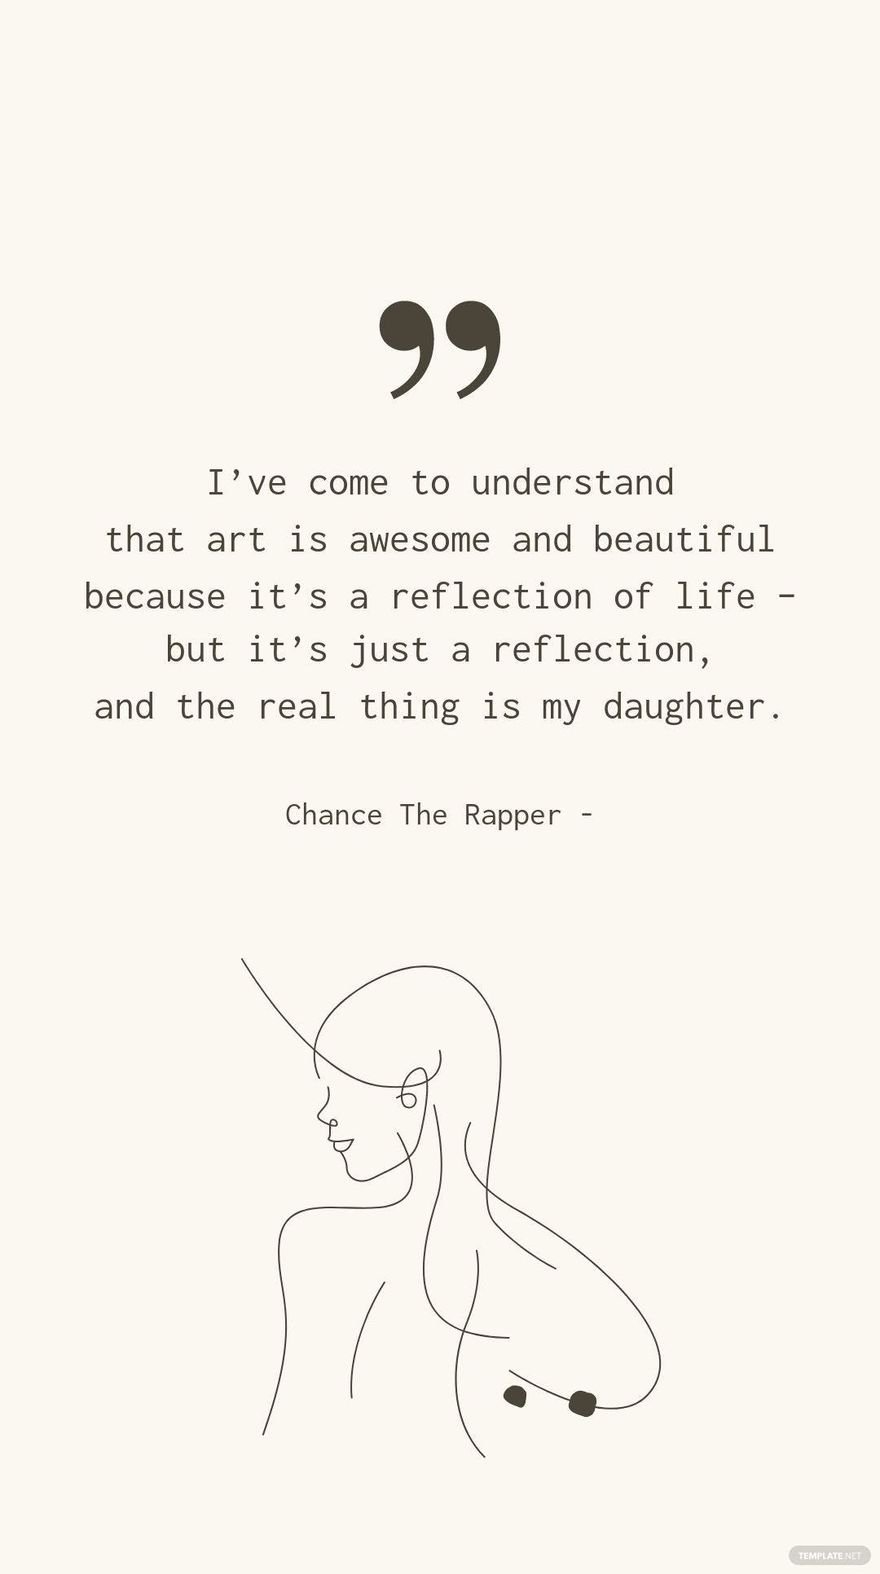 CHANCE THE RAPPER - I’ve come to understand that art is awesome and beautiful because it’s a reflection of life – but it’s just a reflection, and the real thing is my daughter.